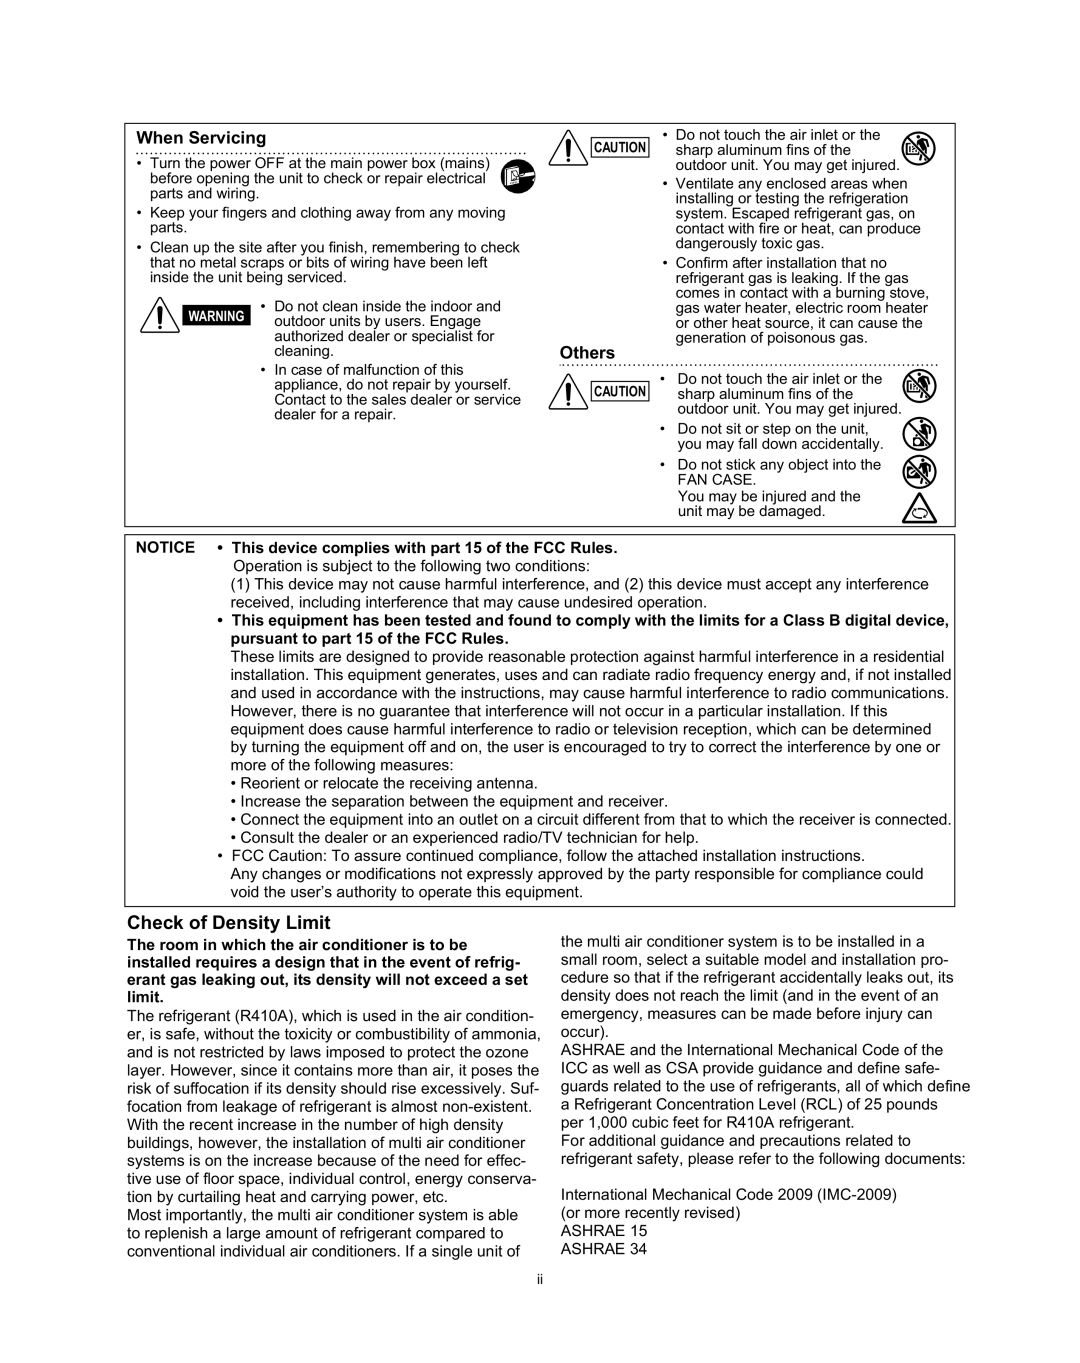 Panasonic R410A service manual Check of Density Limit, When Servicing, Others 